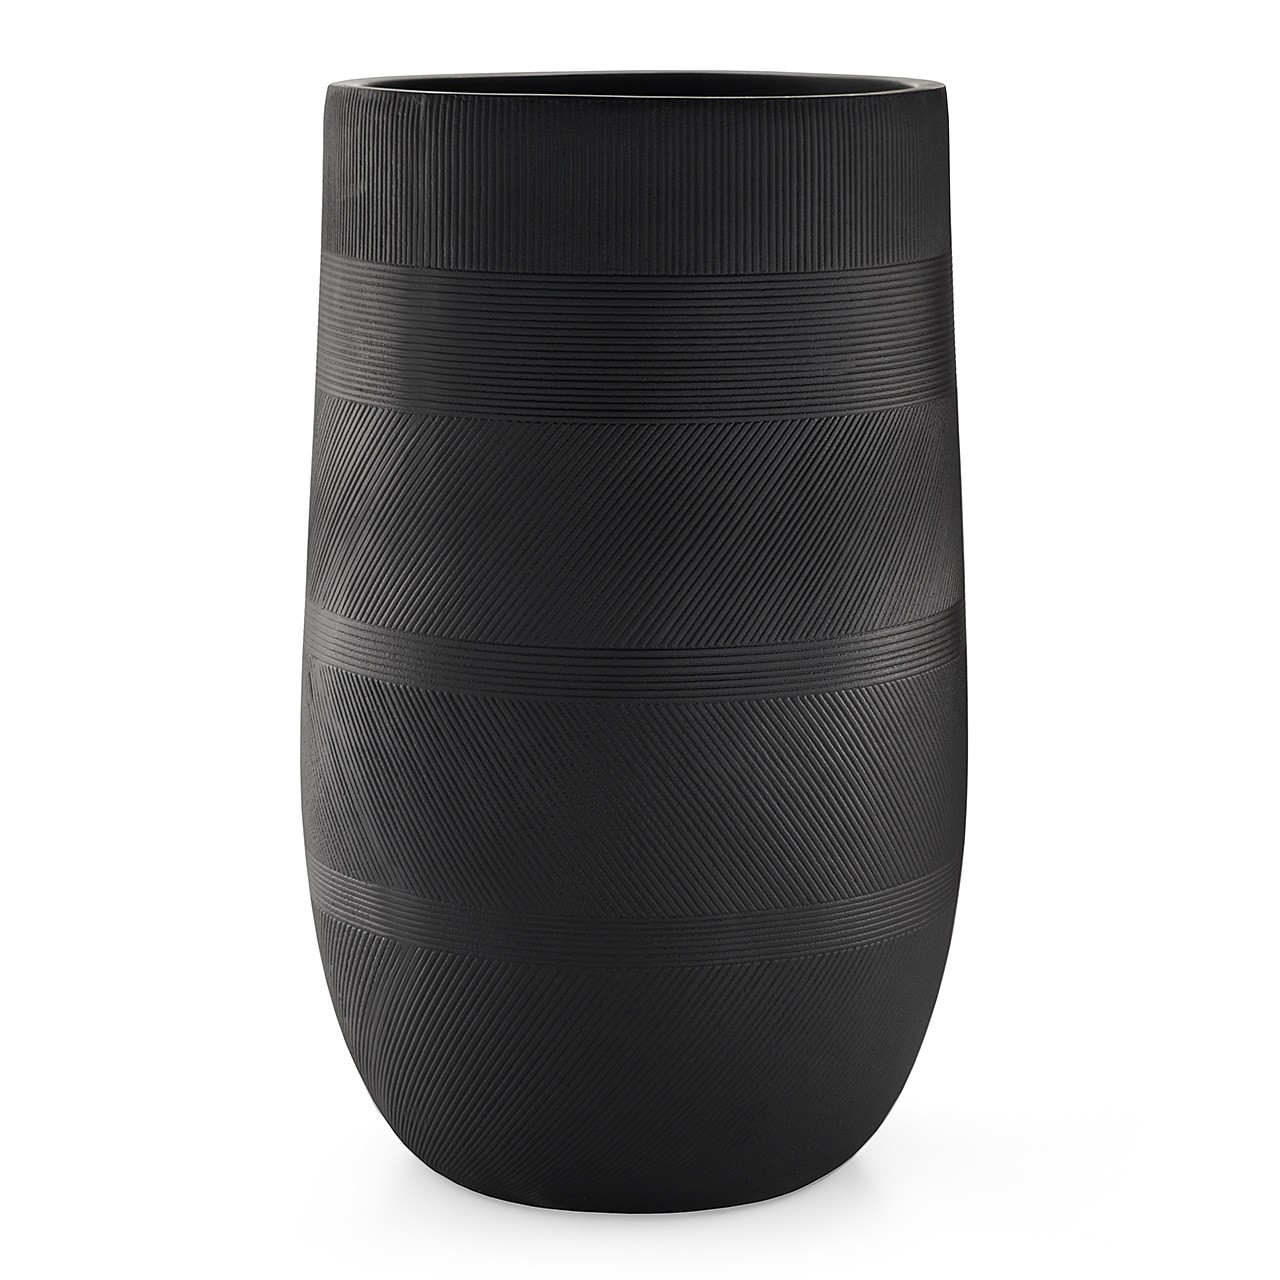 In-Store Only - 16.5 in. x 29.9 in. Large Black Striped Planter